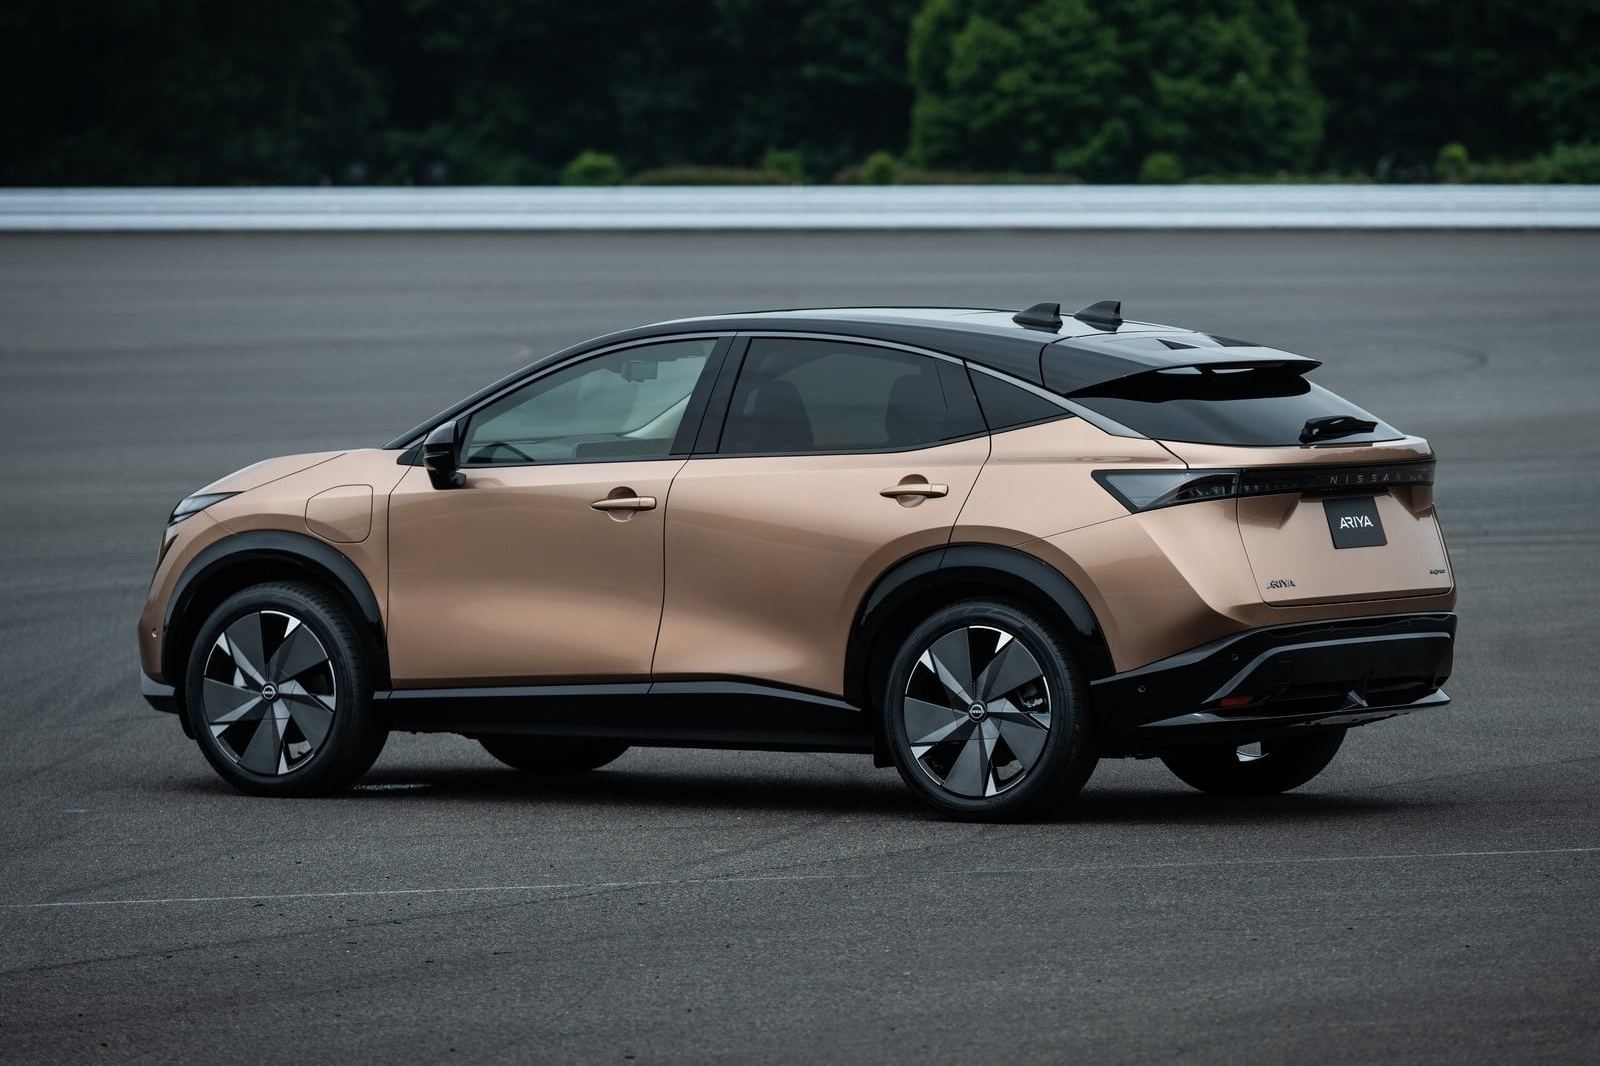 industry news, nissan becomes first japanese carmaker to adopt tesla's nacs connector